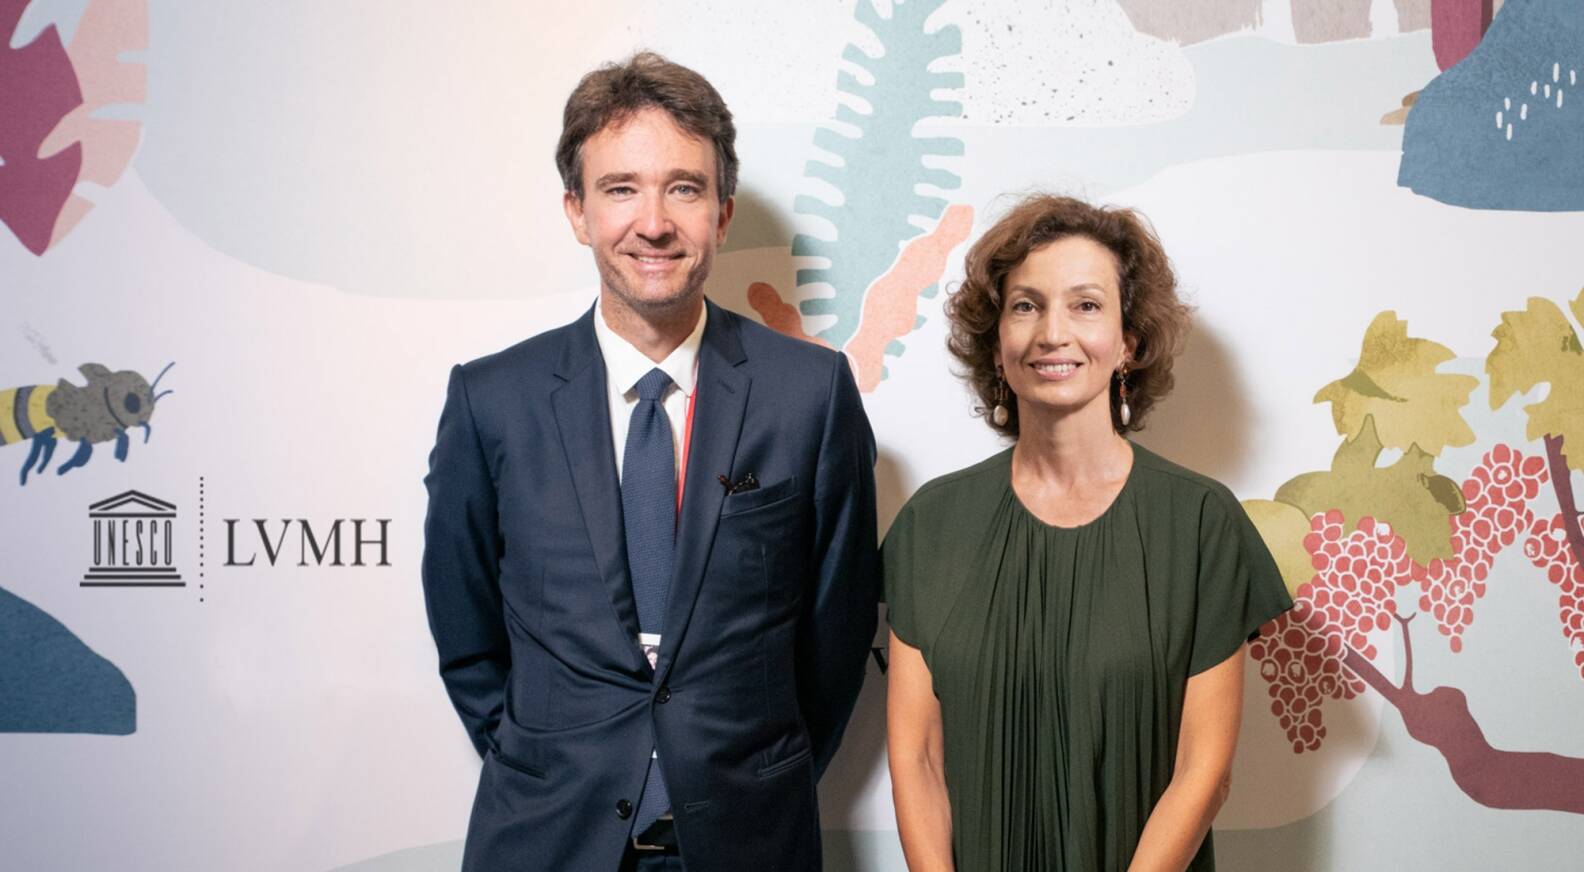 LVMH and UNESCO join forces again to safeguard biodiversity - LVMH